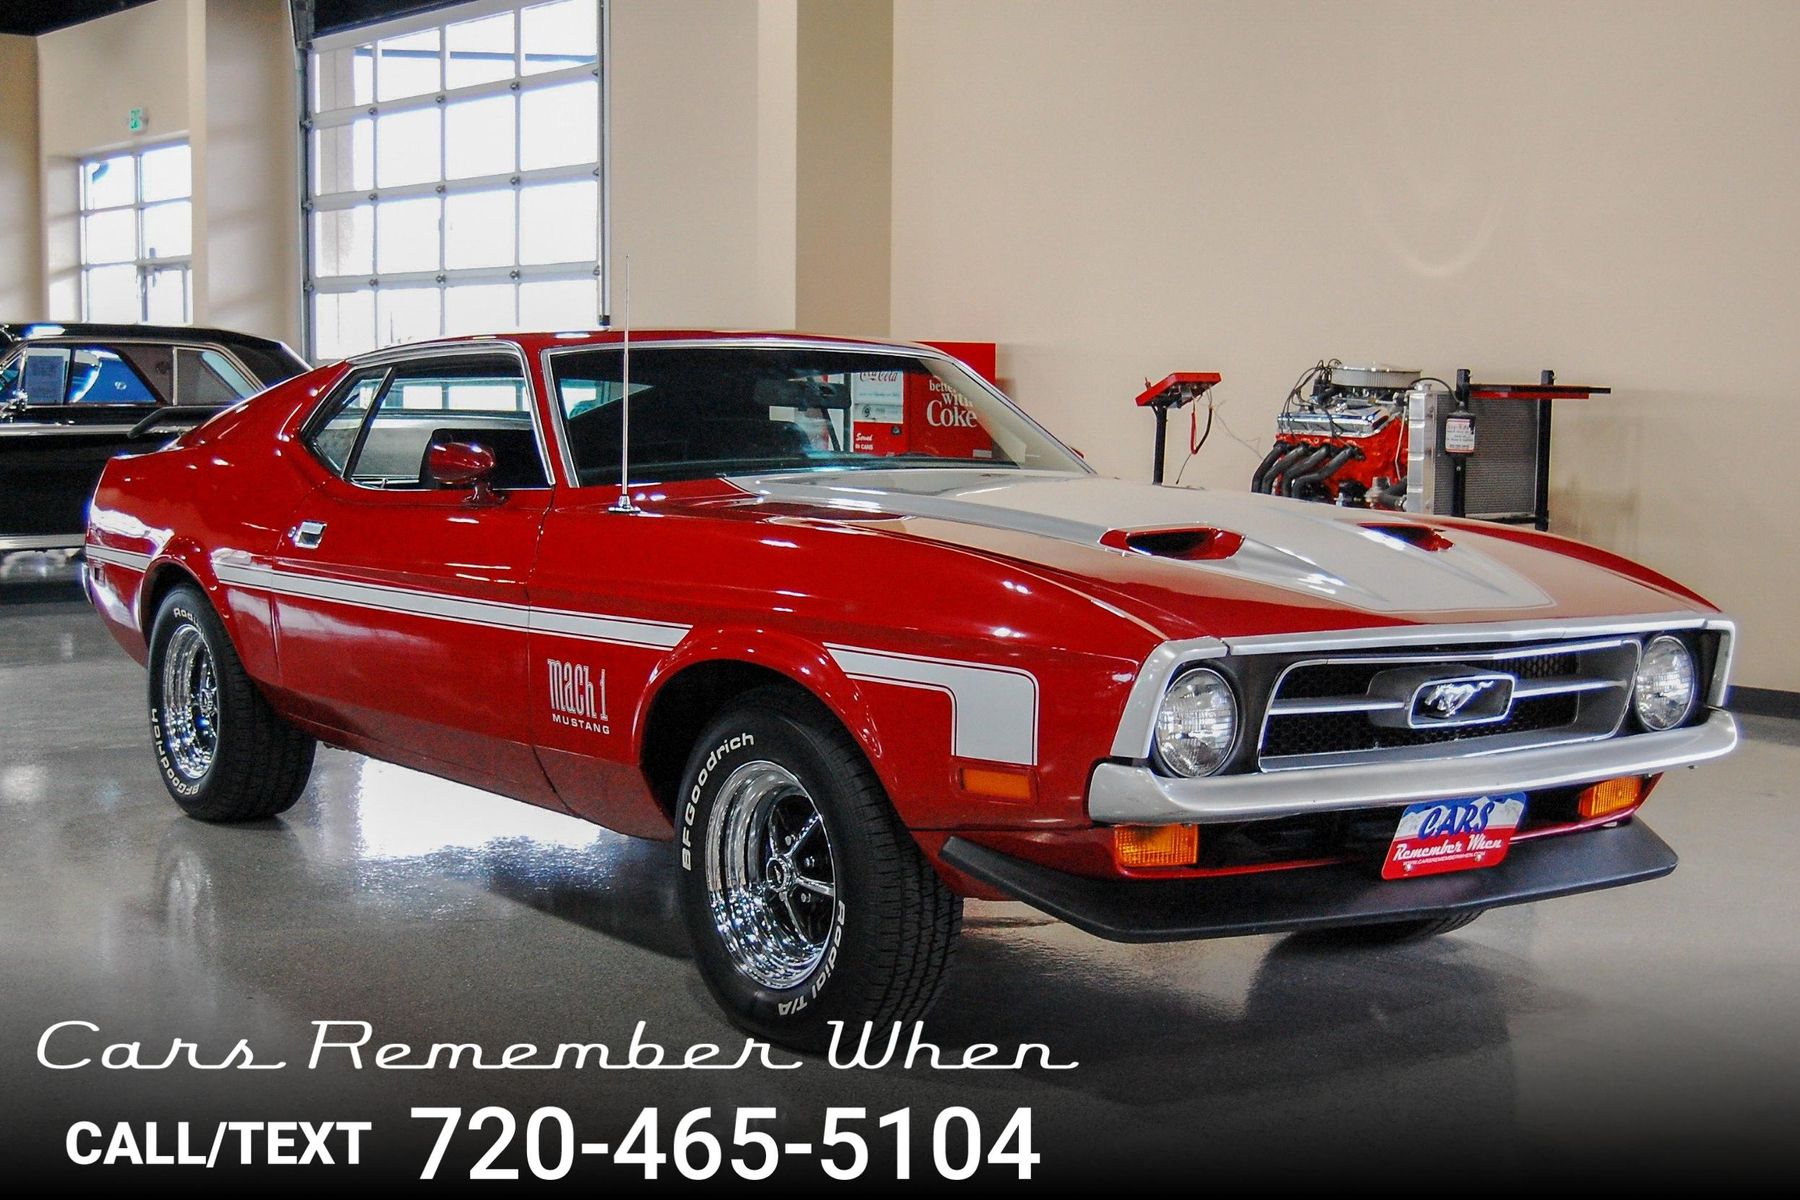 1971 Ford Mustang Mach1 Cars Remember When